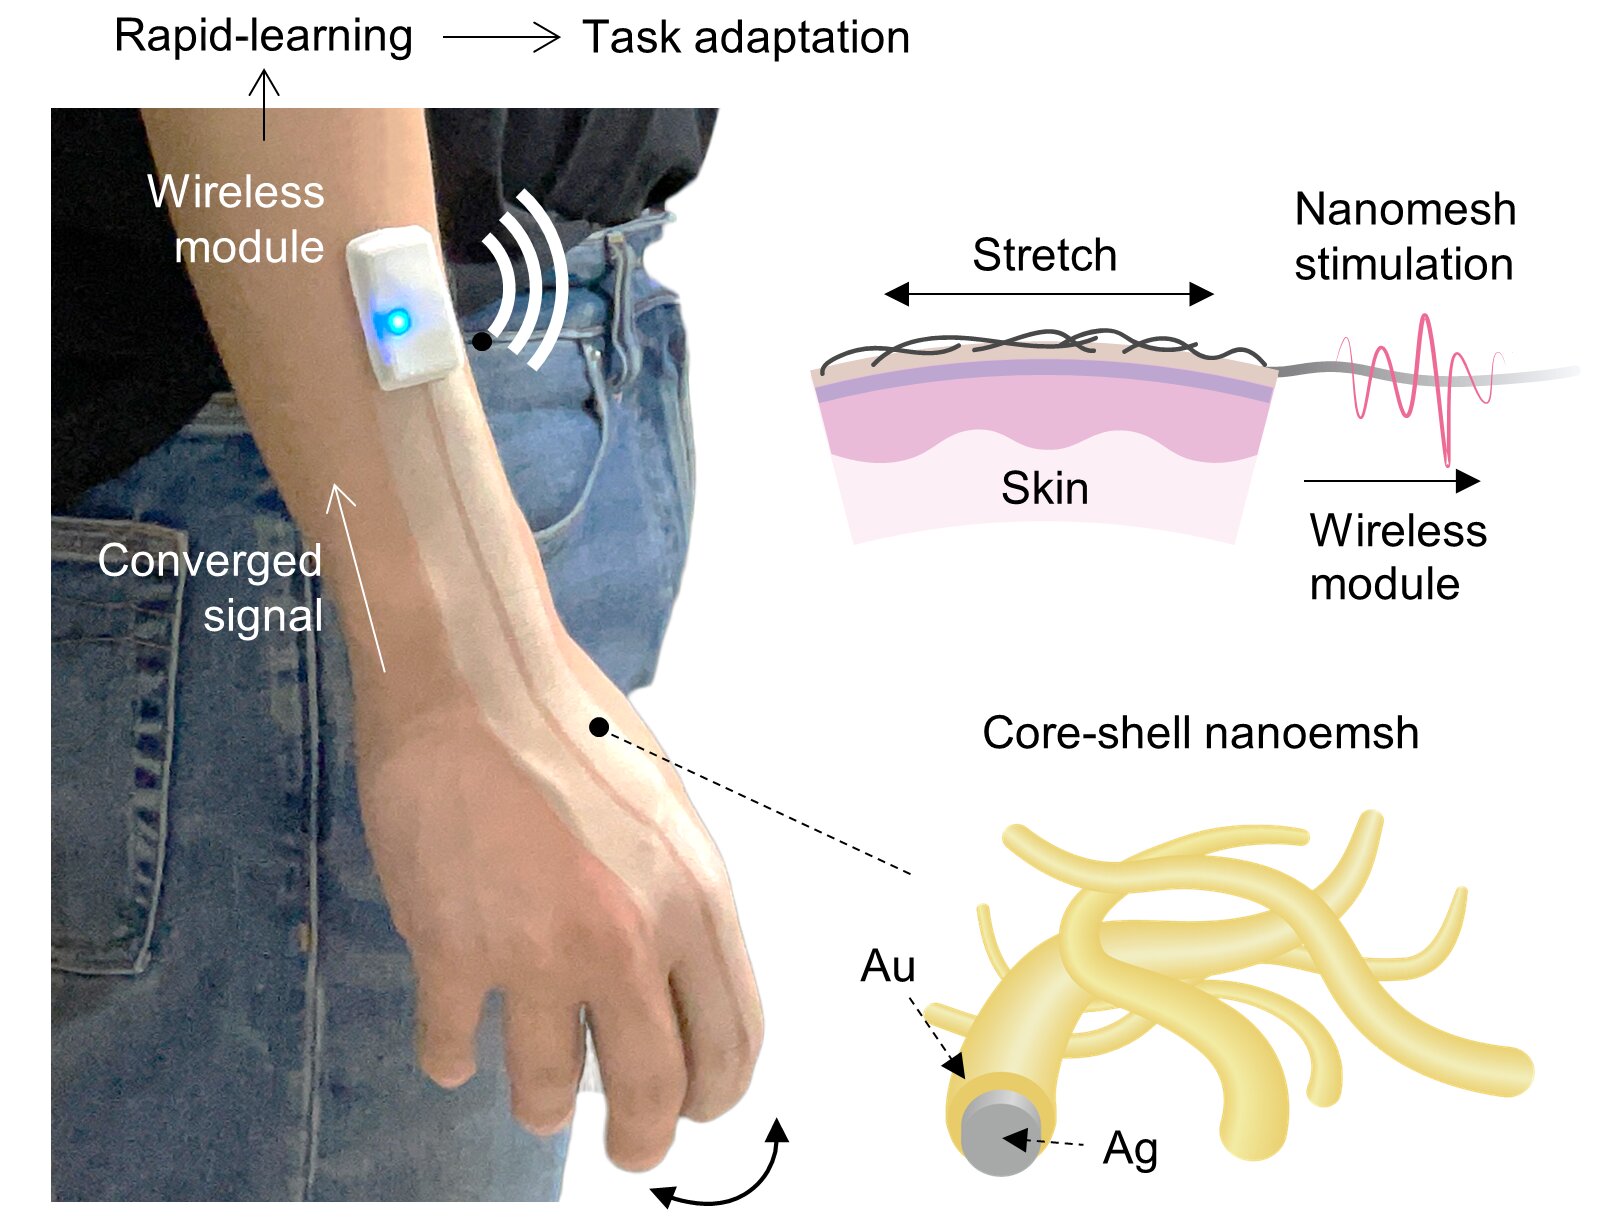 Spray-on smart skin uses AI to rapidly understand hand tasks